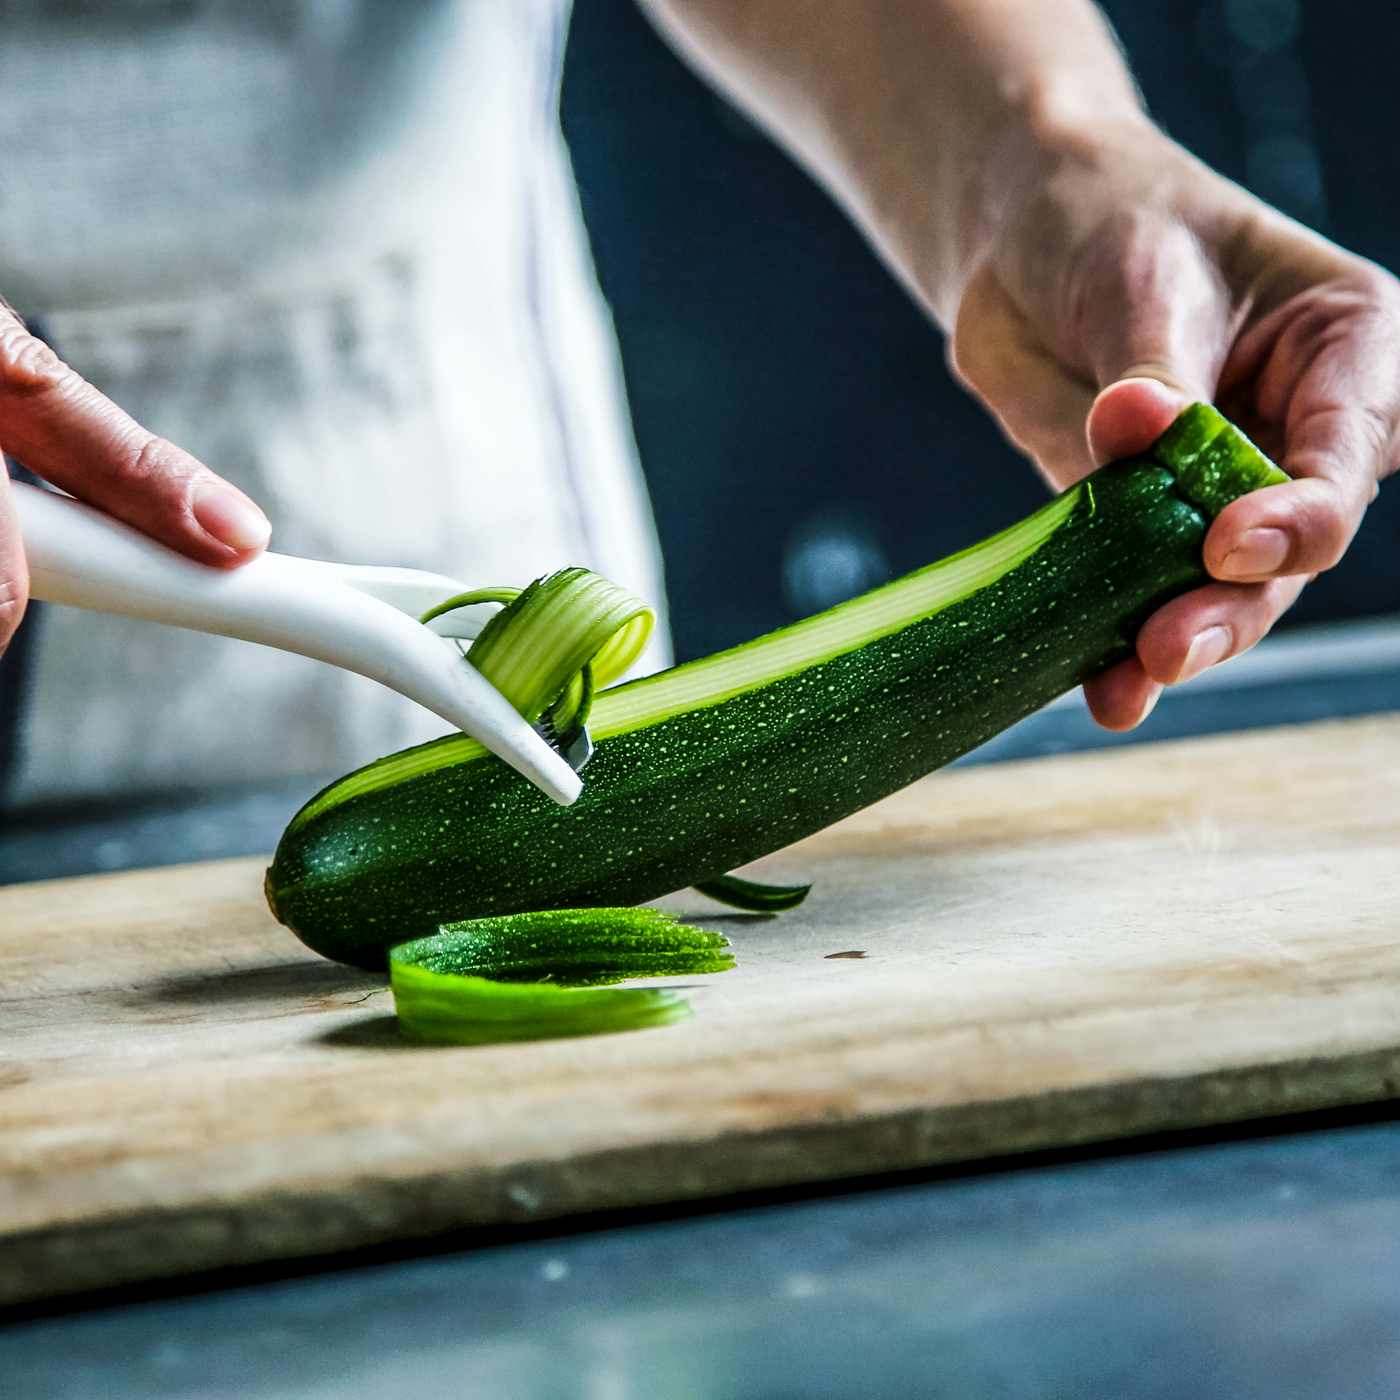 Hands peeling zucchini with a Y Peeler on a cutting board.